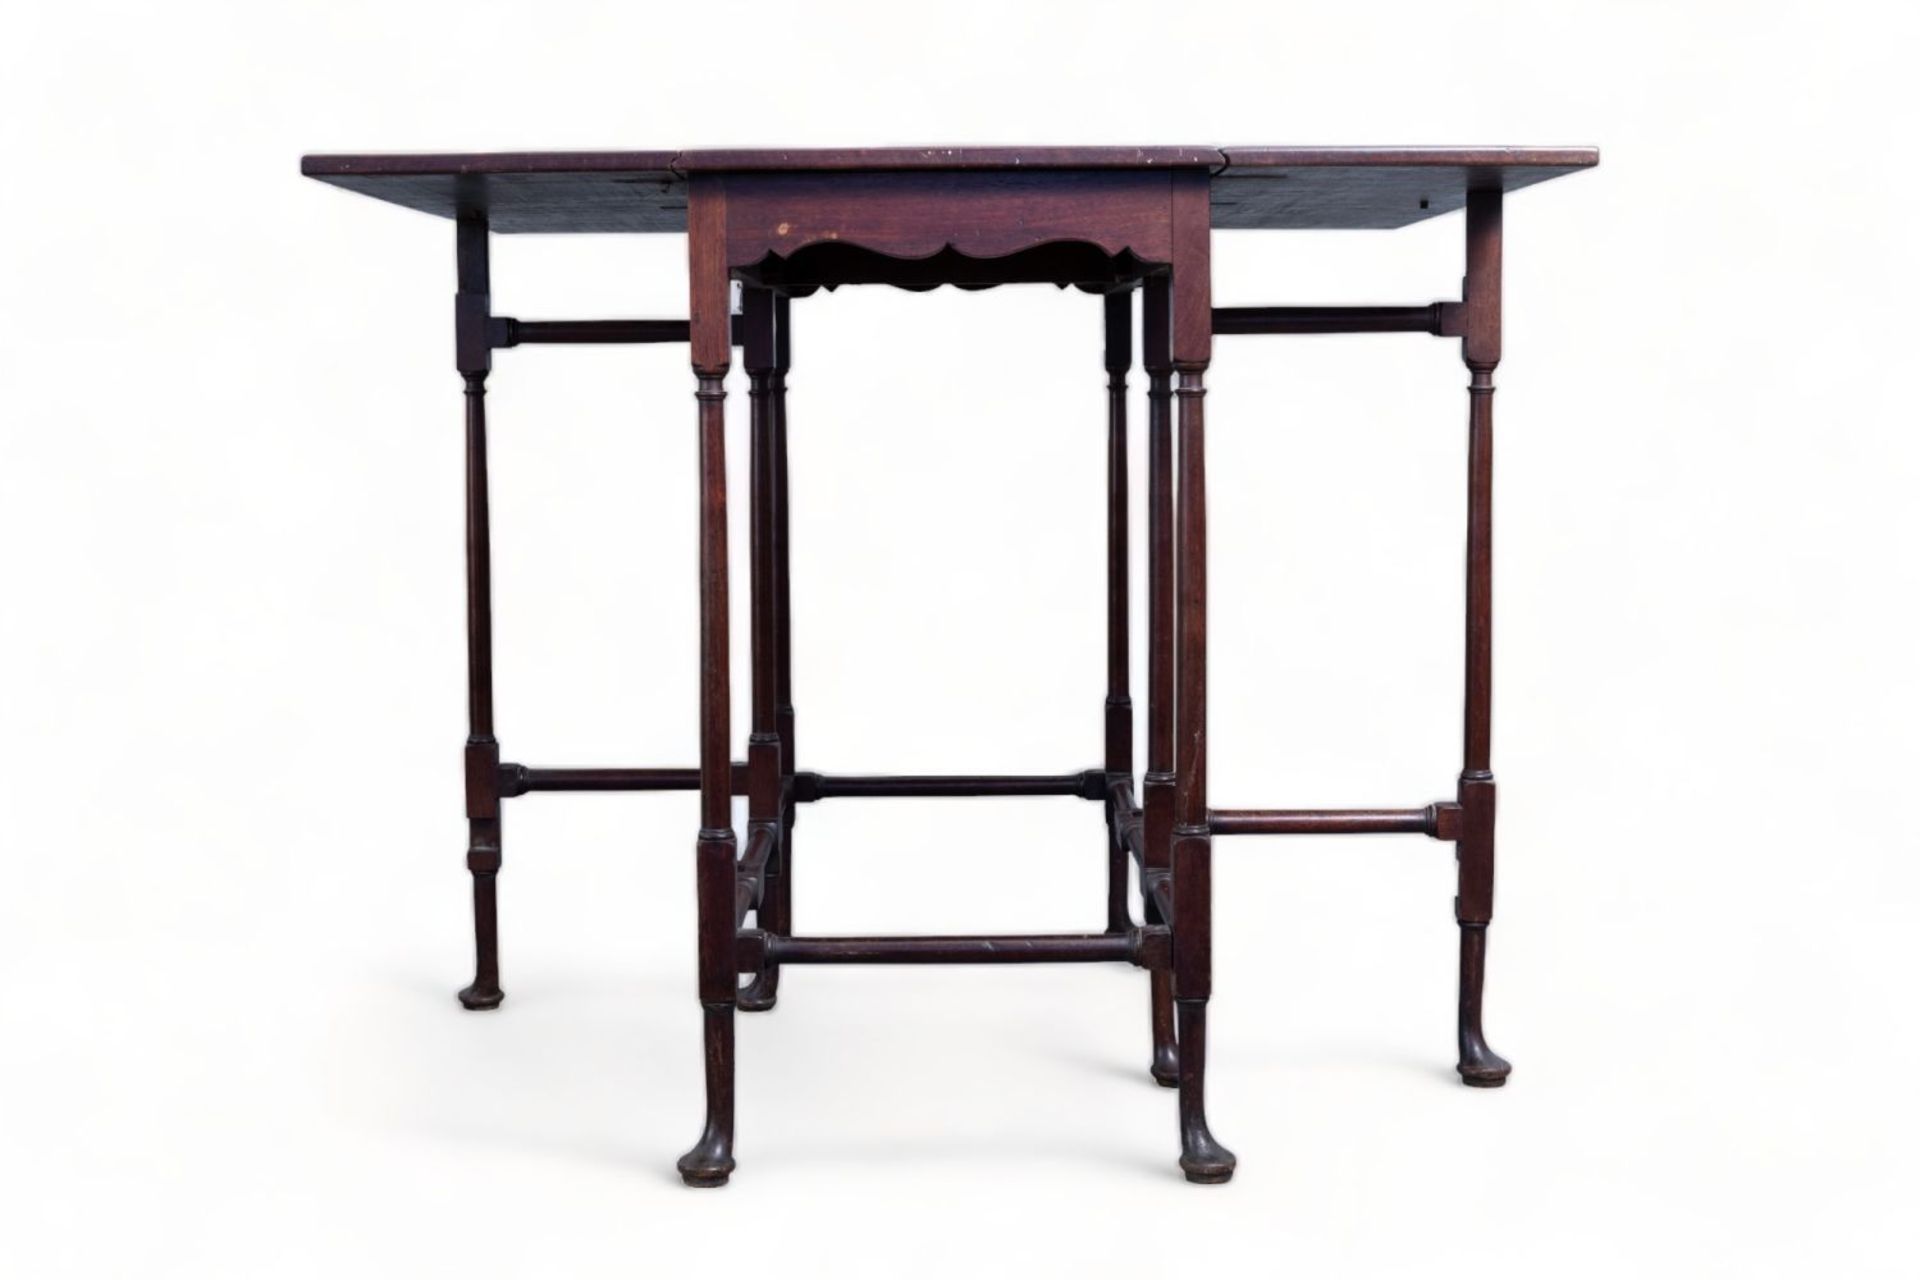 An English George III mahogany spider-leg table by Thomas Chippendale (1718-1779), third quarter of  - Image 4 of 7